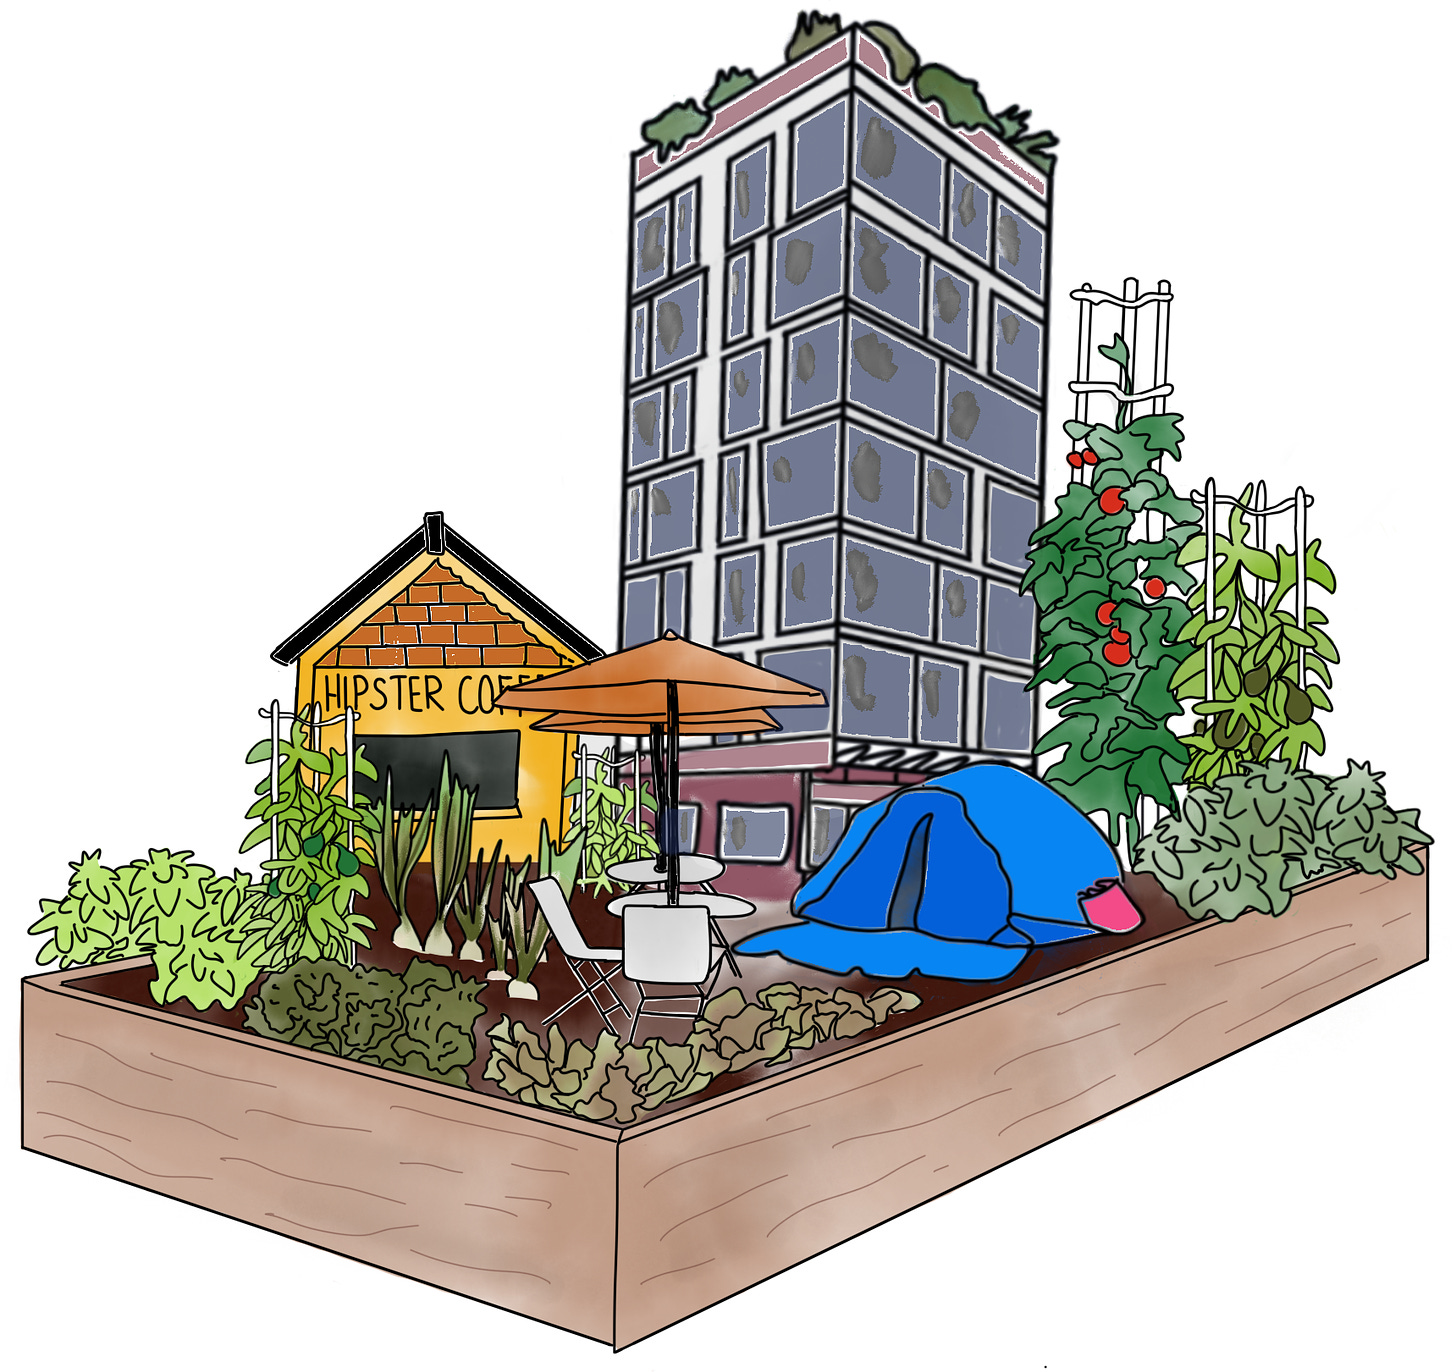 A community garden box growing vegetables as well as housing a new high-rise codo building, a tent, and a "hipster" coffee shop.